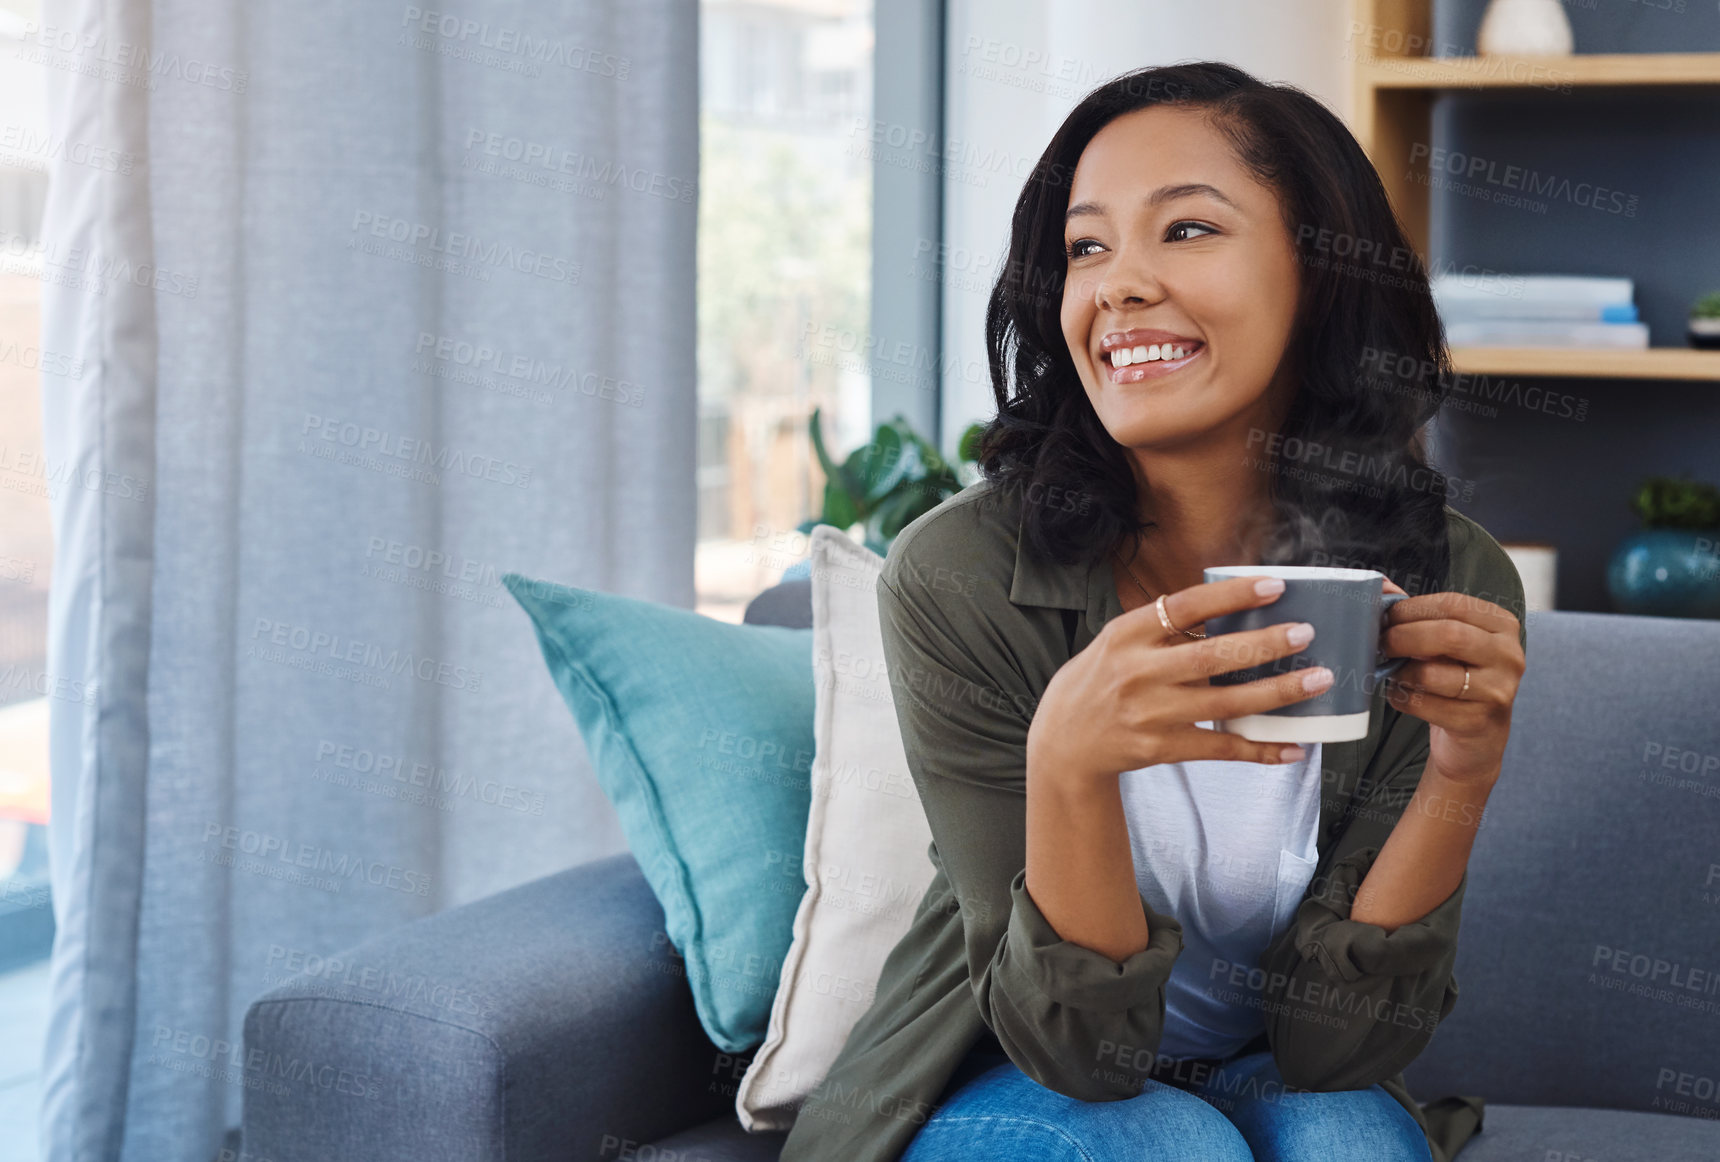 Buy stock photo Shot of an attractive young woman having coffee and relaxing on the sofa at home